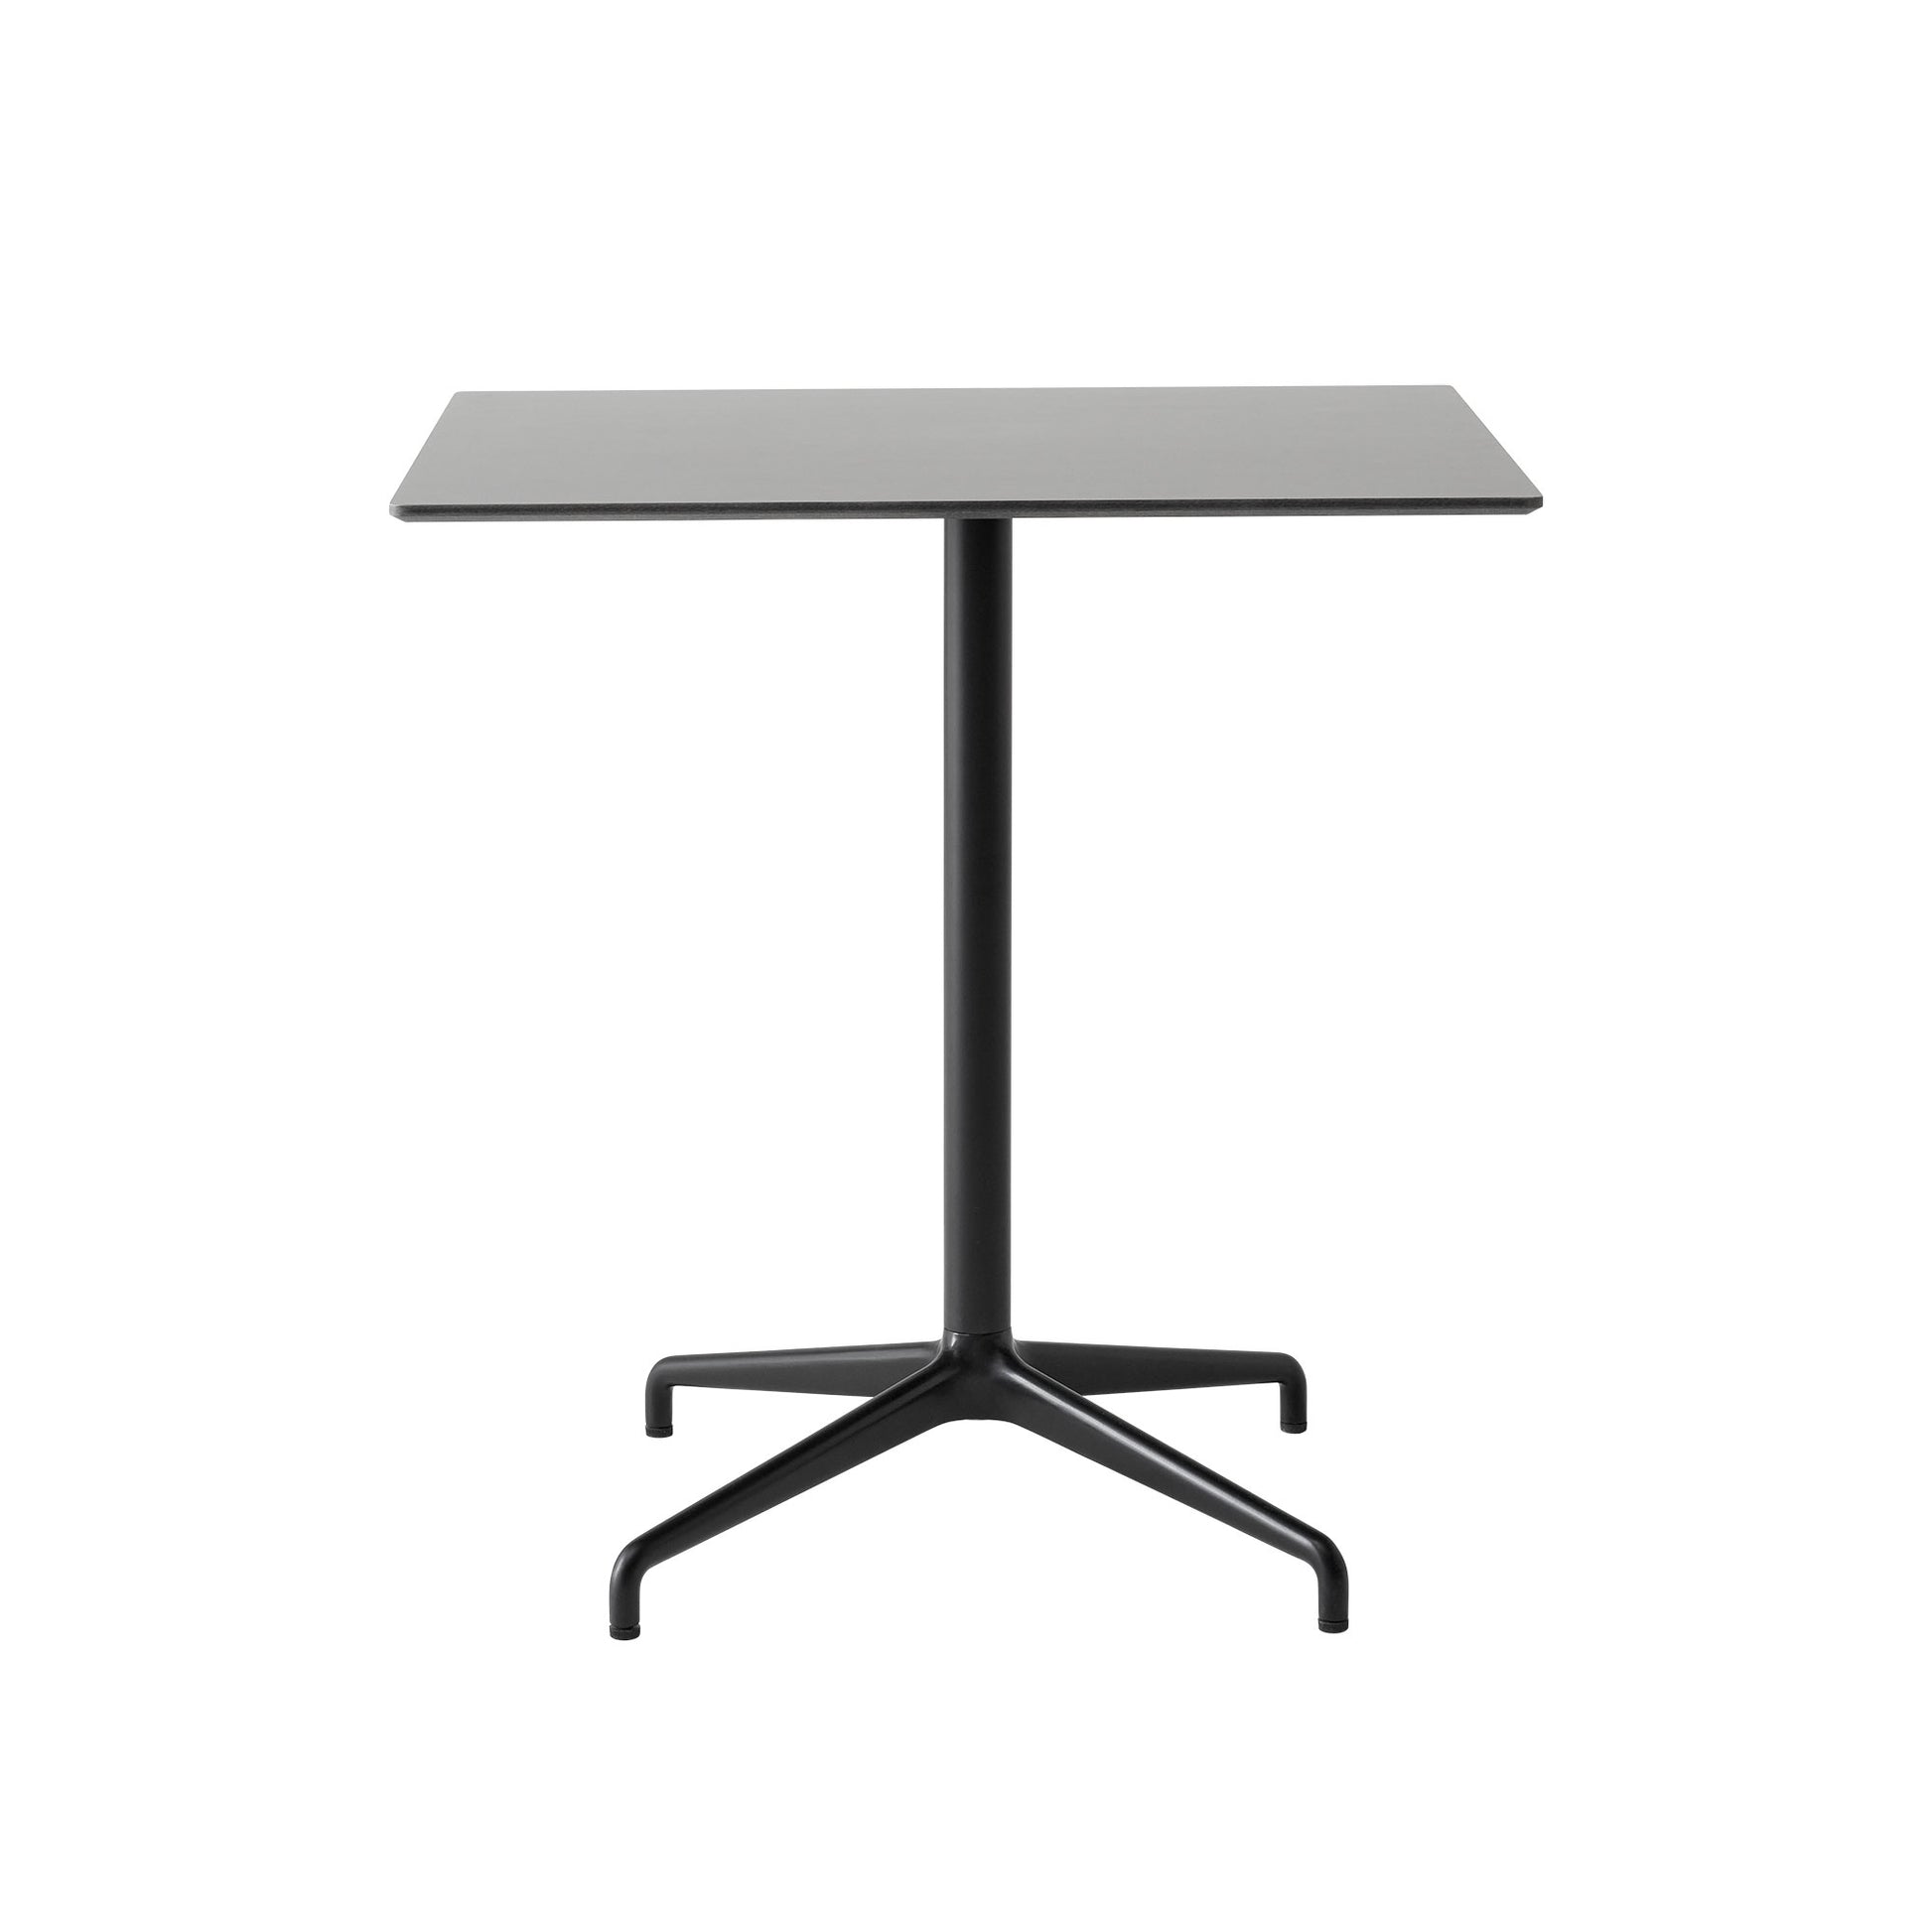 Rely ATD4 Café Table by &tradition #Black